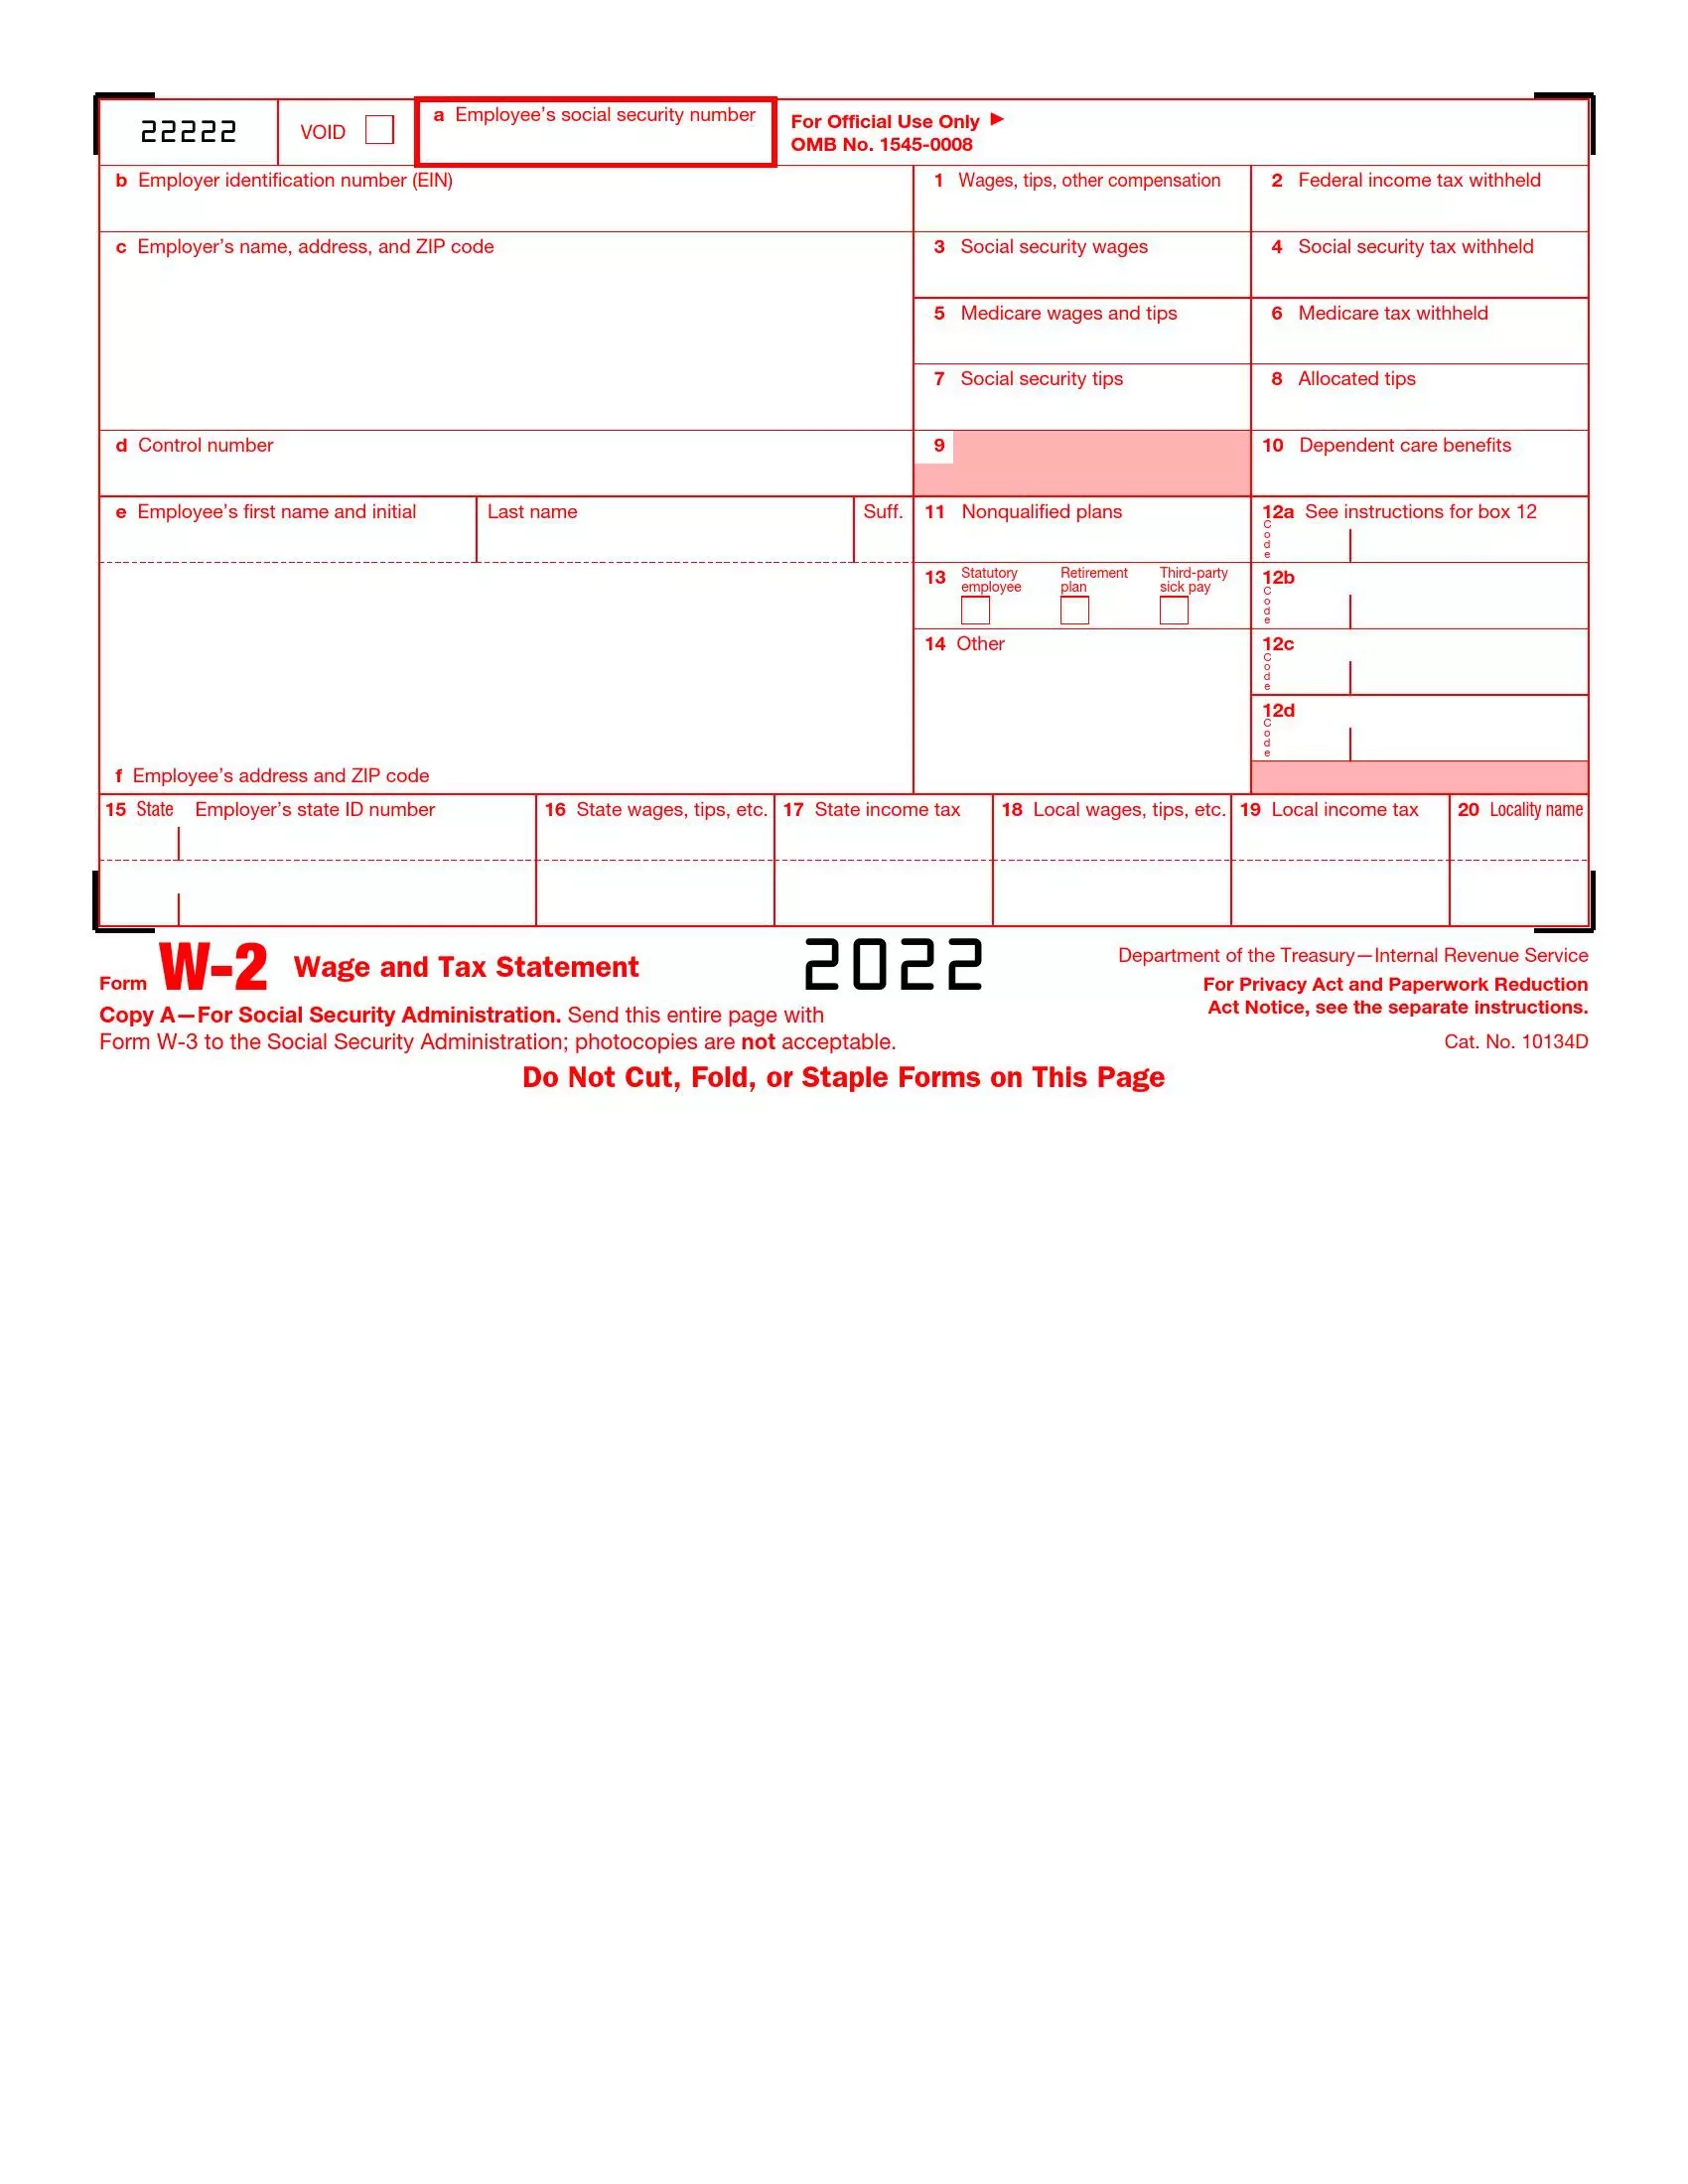 Irs Form W-2 ≡ Fill Out Printable Pdf Forms Online with regard to Family Dollar W2 Forms Online